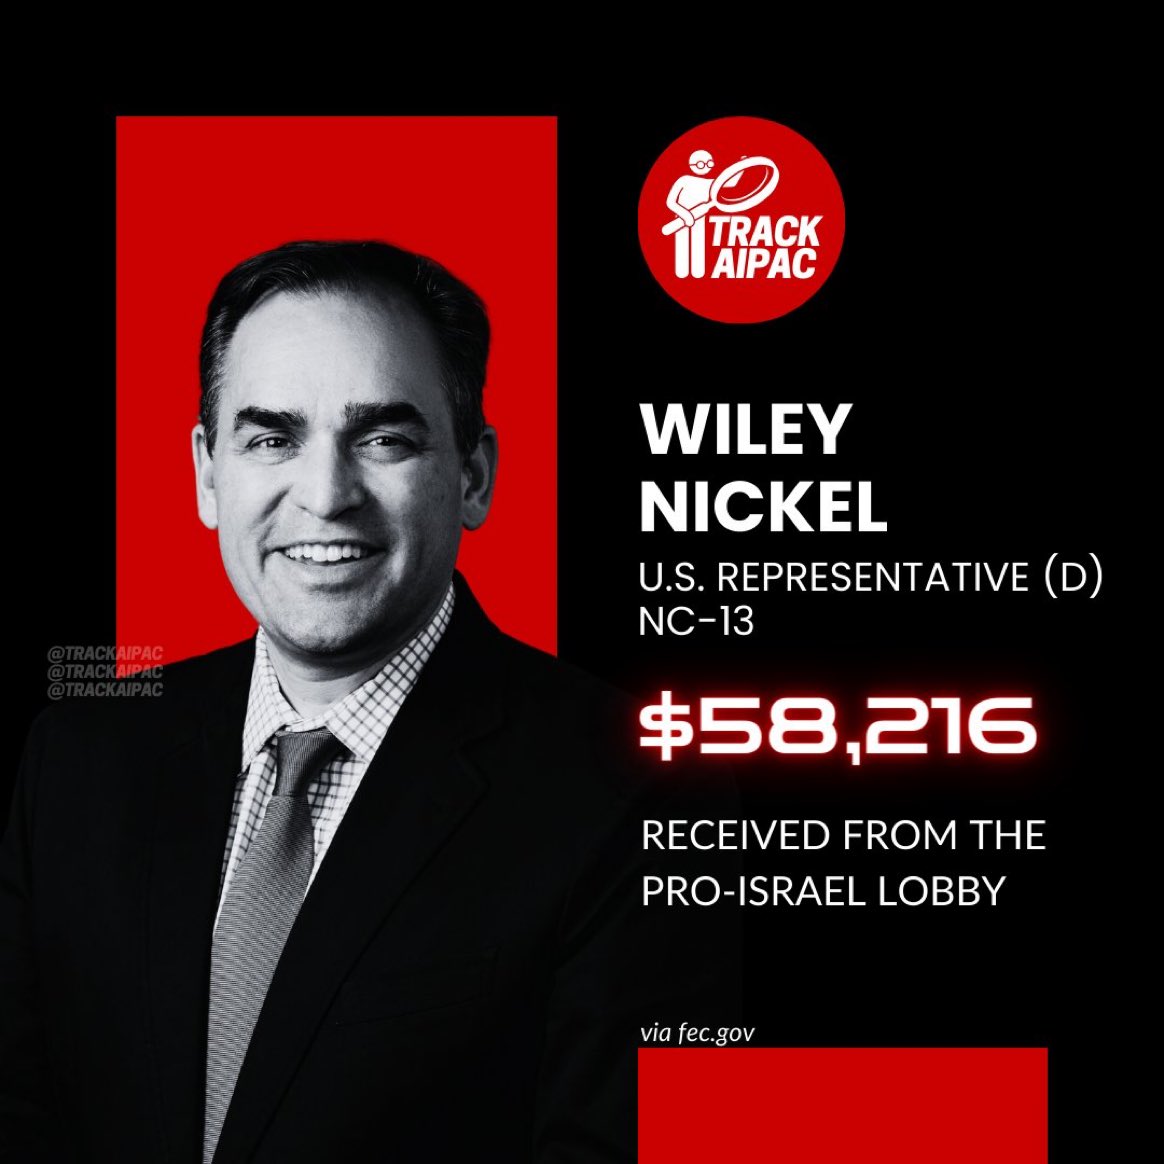 Wiley Nickel is an AIPAC Rep. #RejectAIPAC